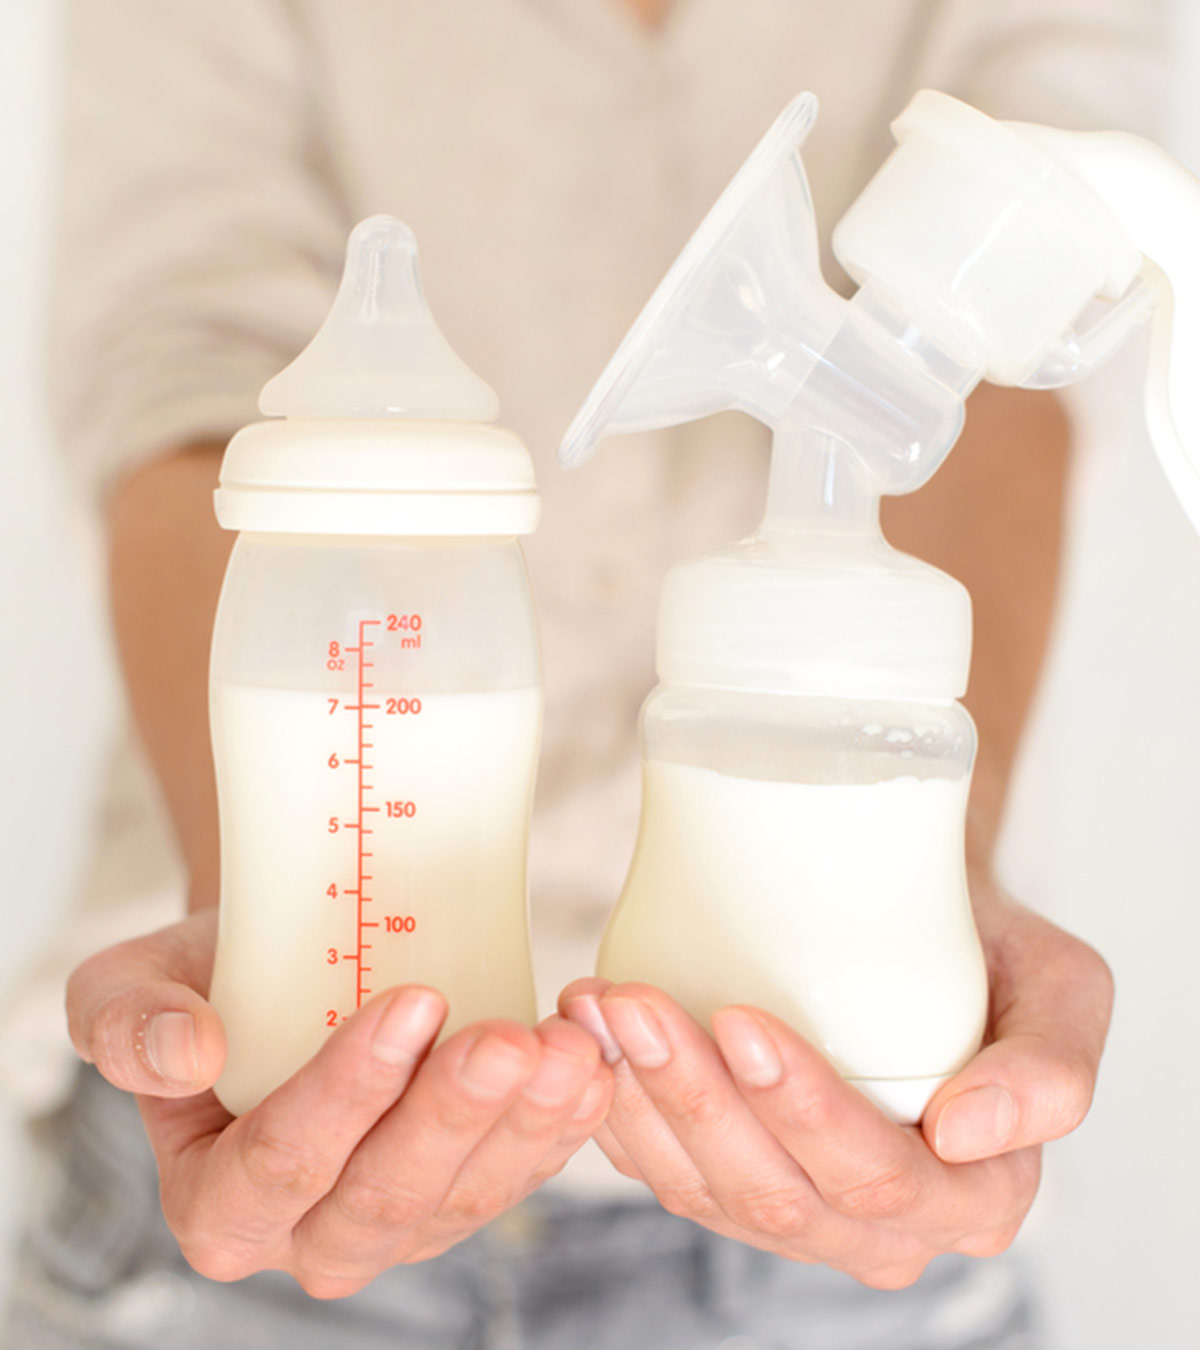 How To Tell If Breast Milk Is Bad? Signs And Tips To Prevent